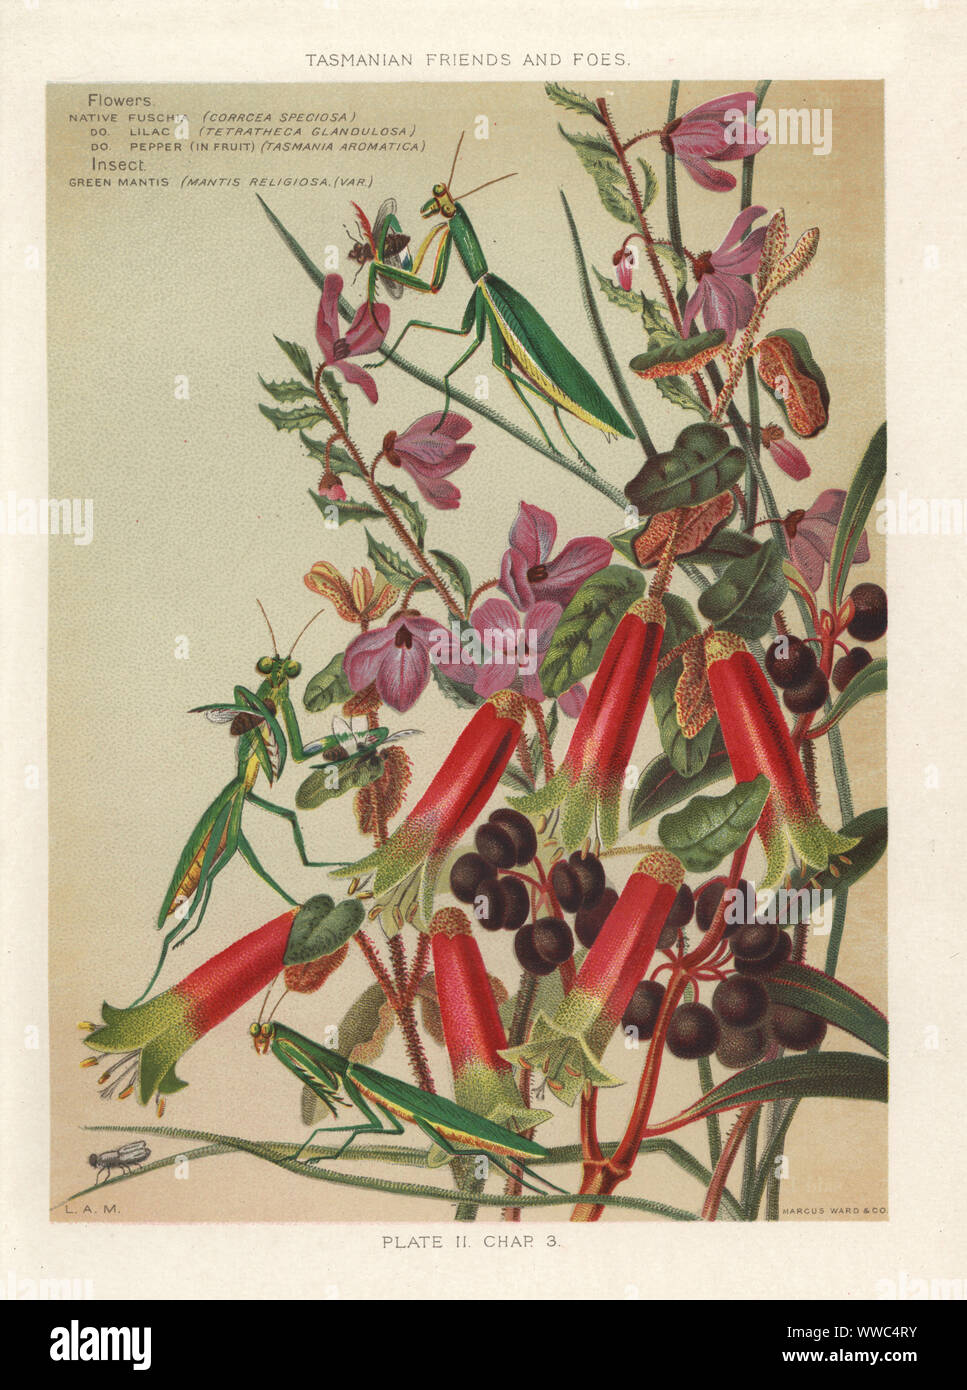 Native fuchsia, Correa speciosa, native lilac, Tetratheca glandulosa, native pepper, Tasmannia aromatica with green mantis, Mantis religiosa var.. Chromolithograph after an illustration by Louisa Anne Meredith from her book Tasmanian Friends and Foes, Feathered, Furred and Finned, Marcus Ward, London, 1881. Stock Photo